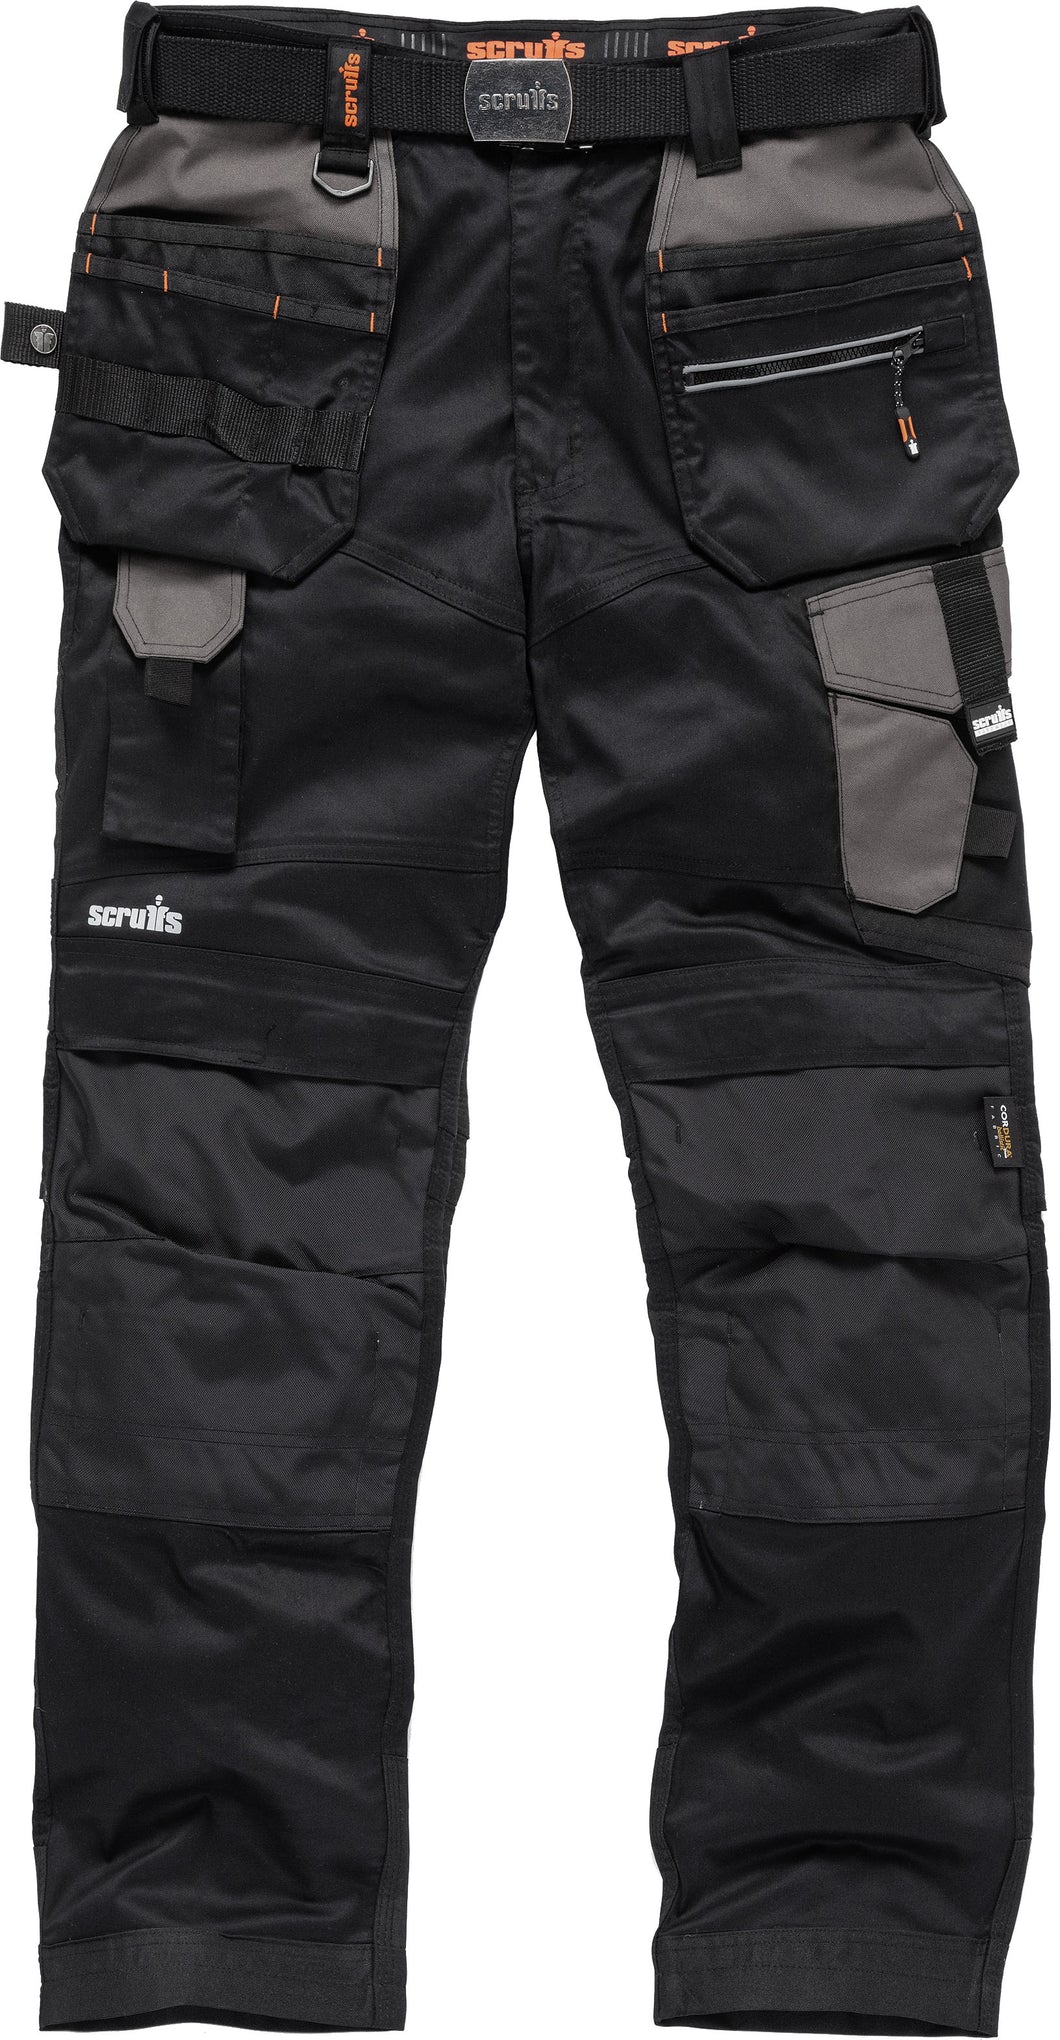 SCRUFFS Pro-Flex Holster Trousers - Black - Various Sizes Available